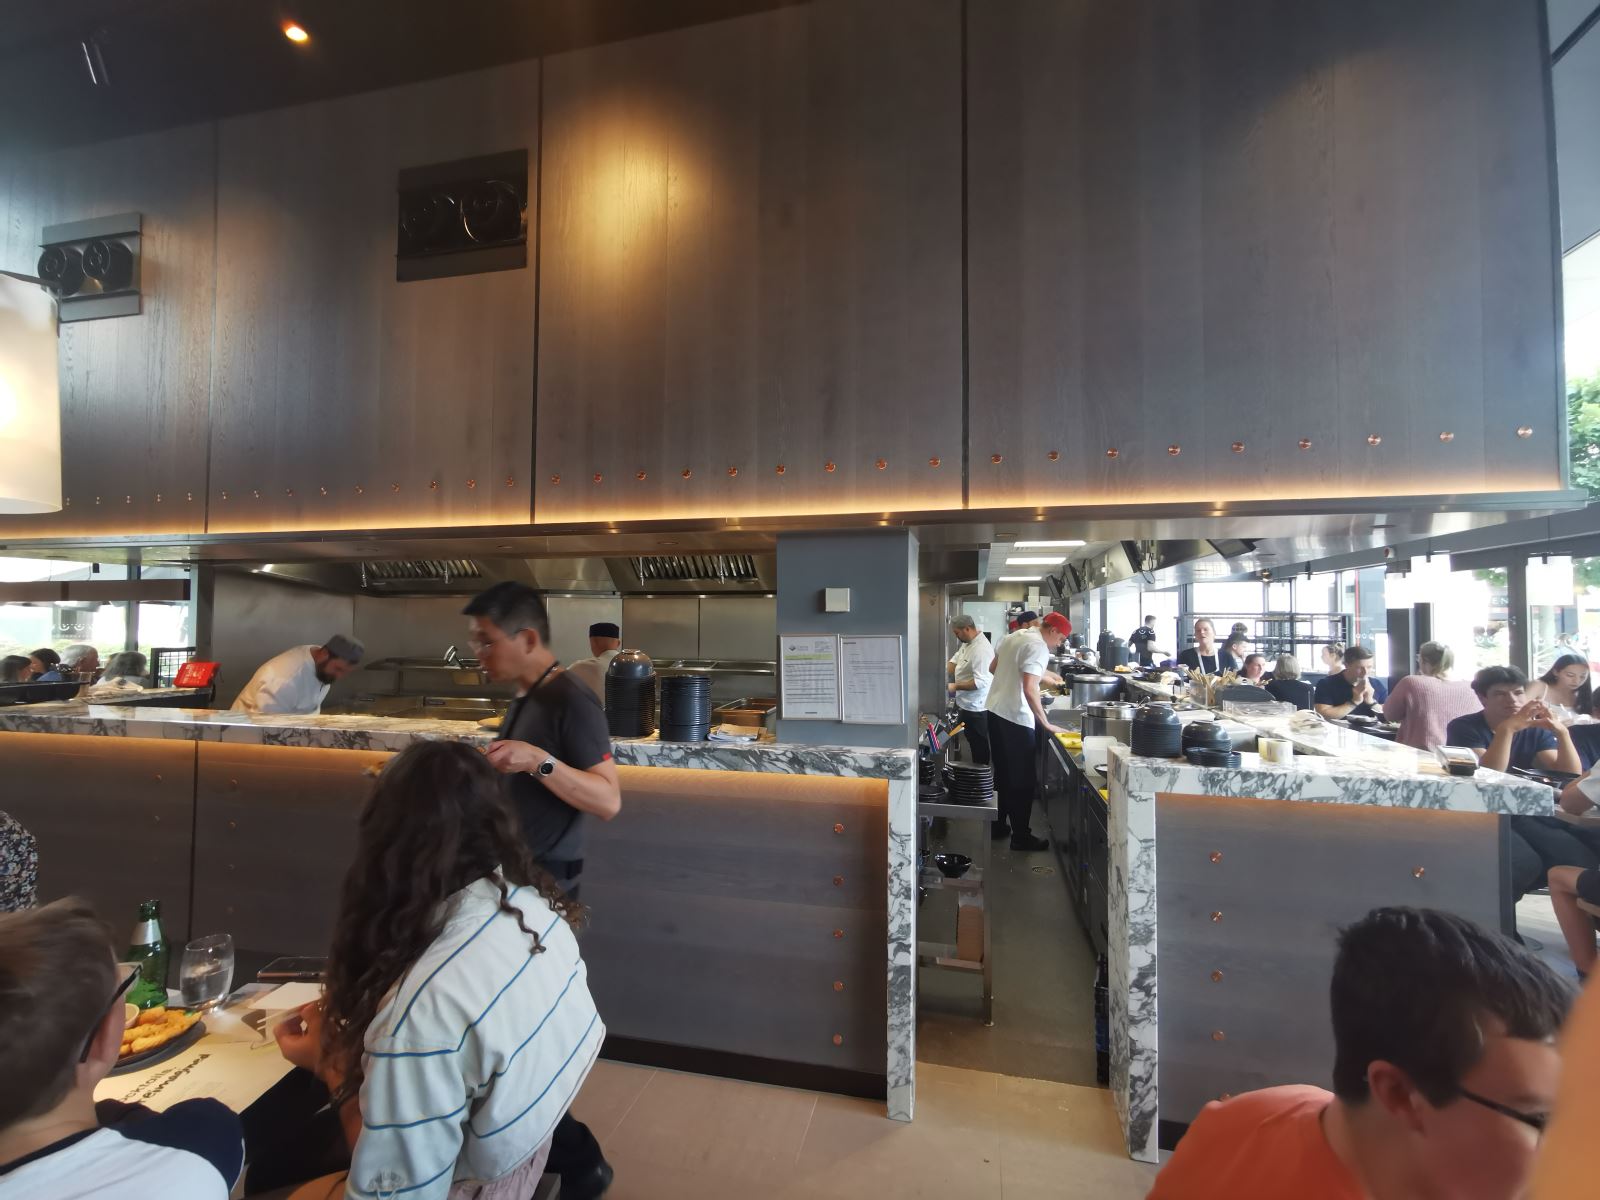 Open kitchen at wagamama